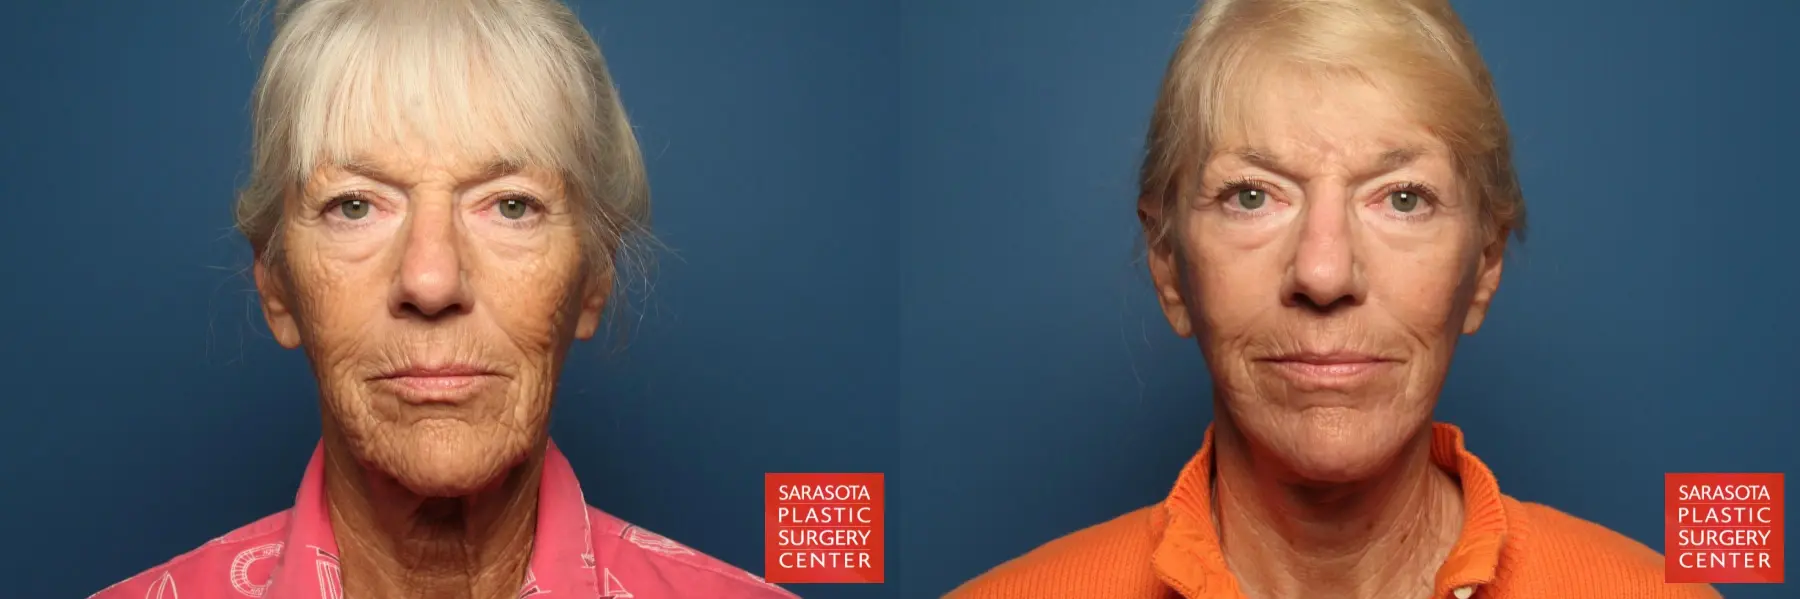 Cheek Lift: Patient 4 - Before and After 1